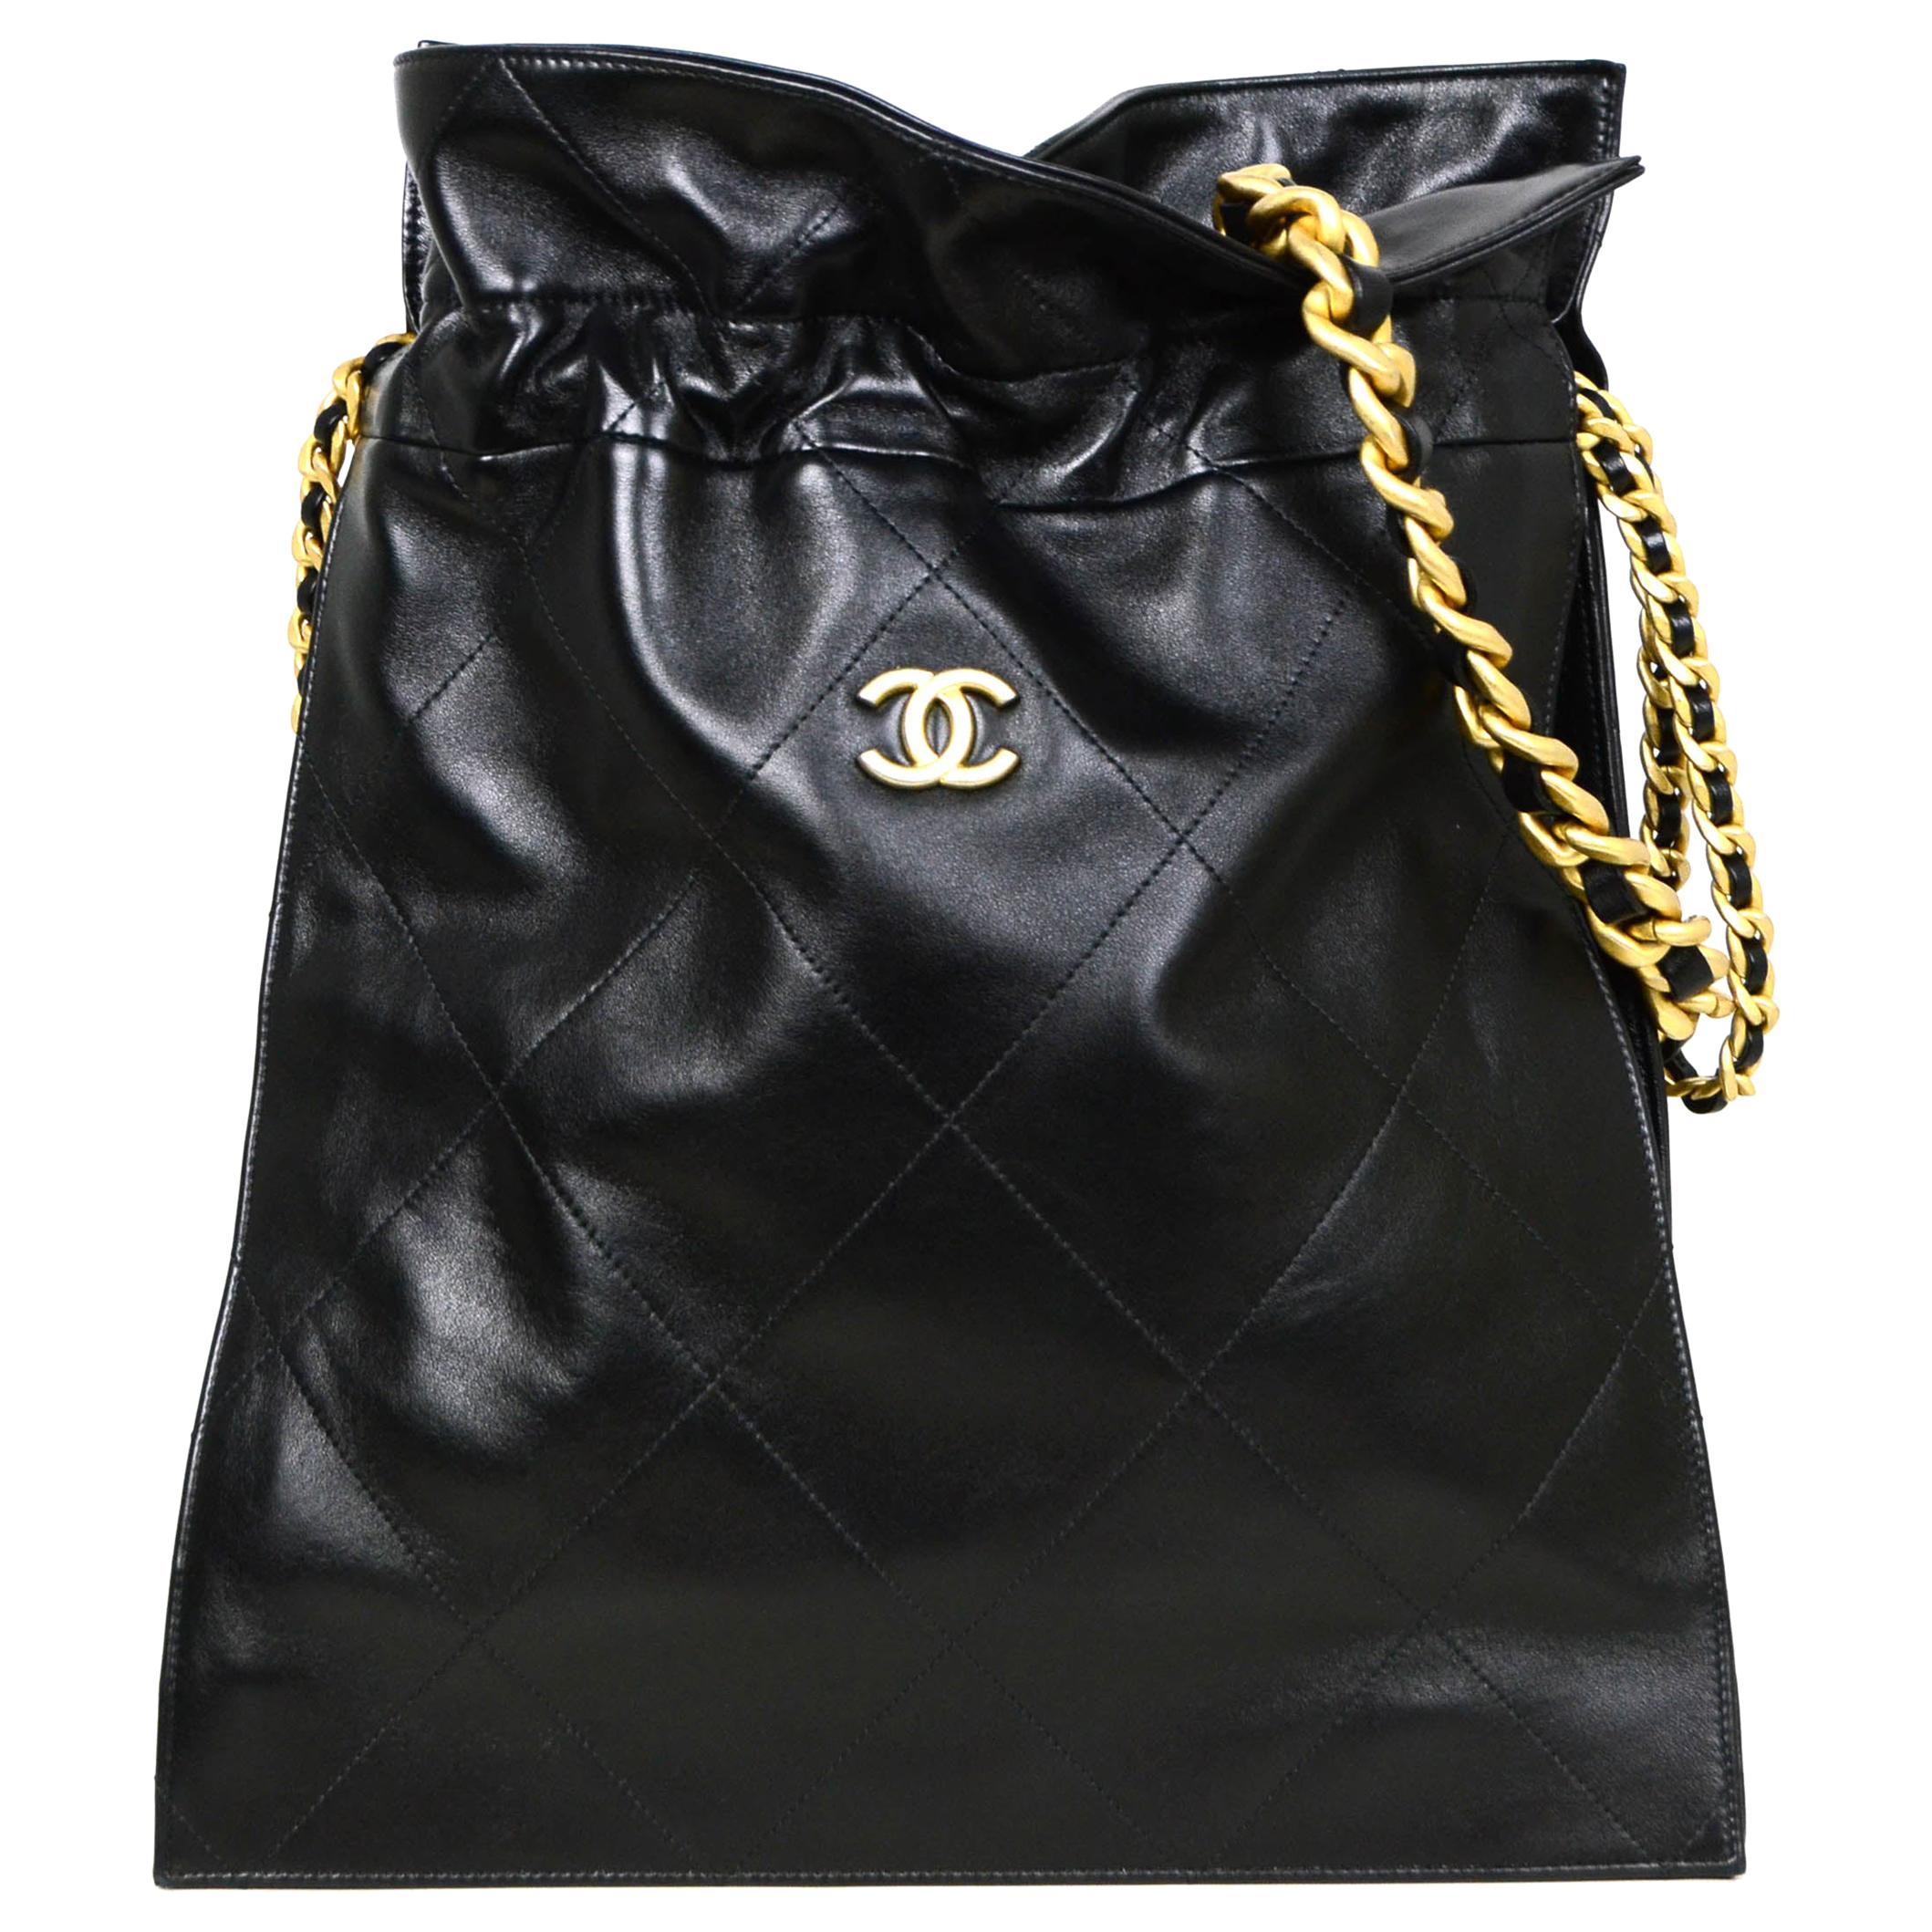 Chanel 2020 Black Shiny Lambskin Leather Chain Drawstring Quilted Tote Bag